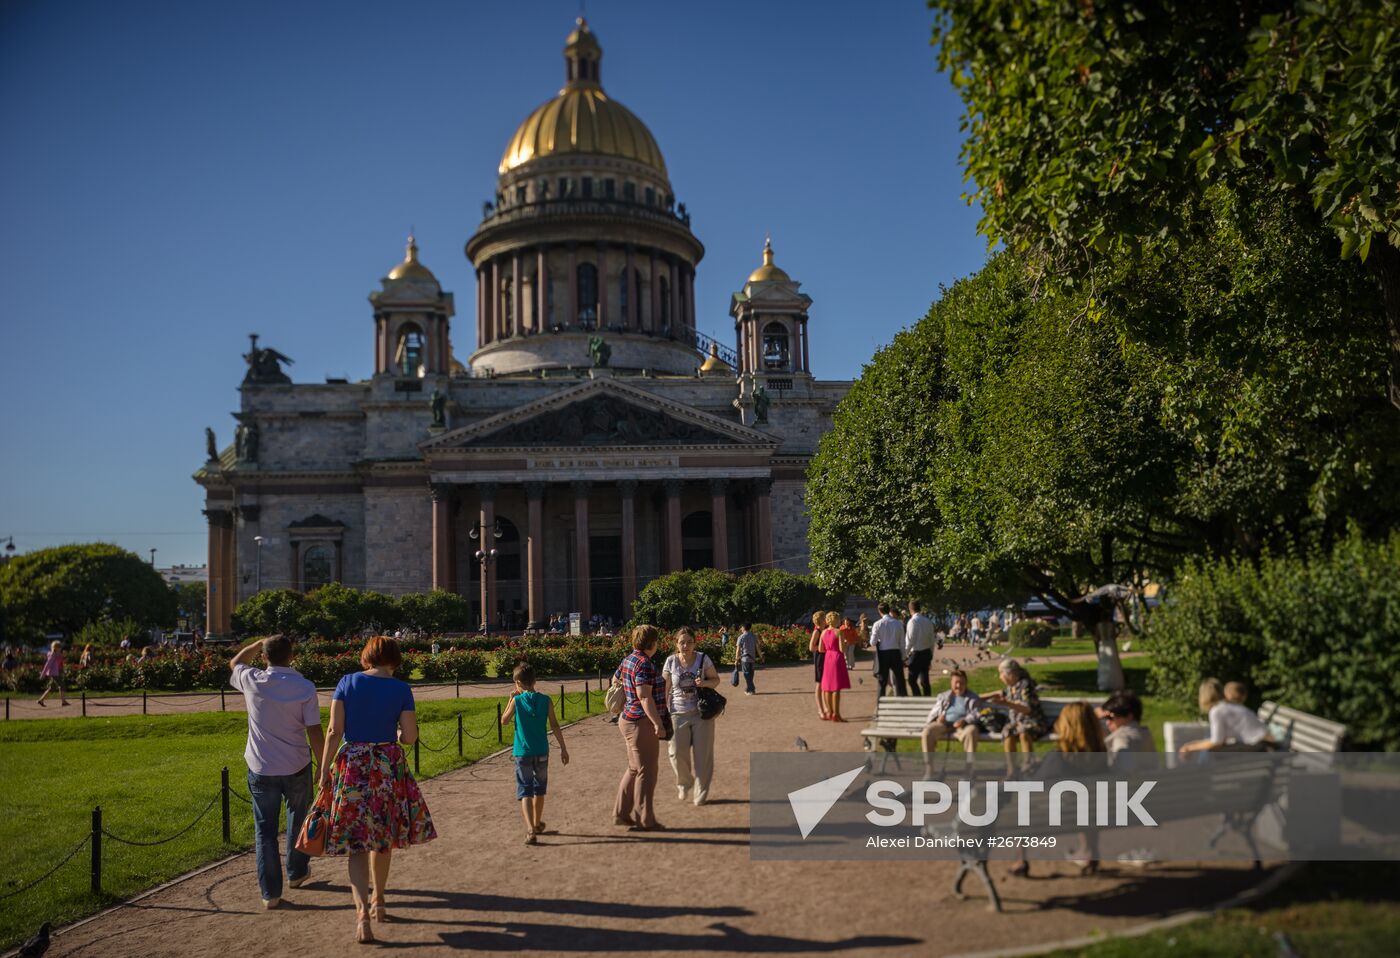 Saint Isaac's Cathedral in St. Petersburg